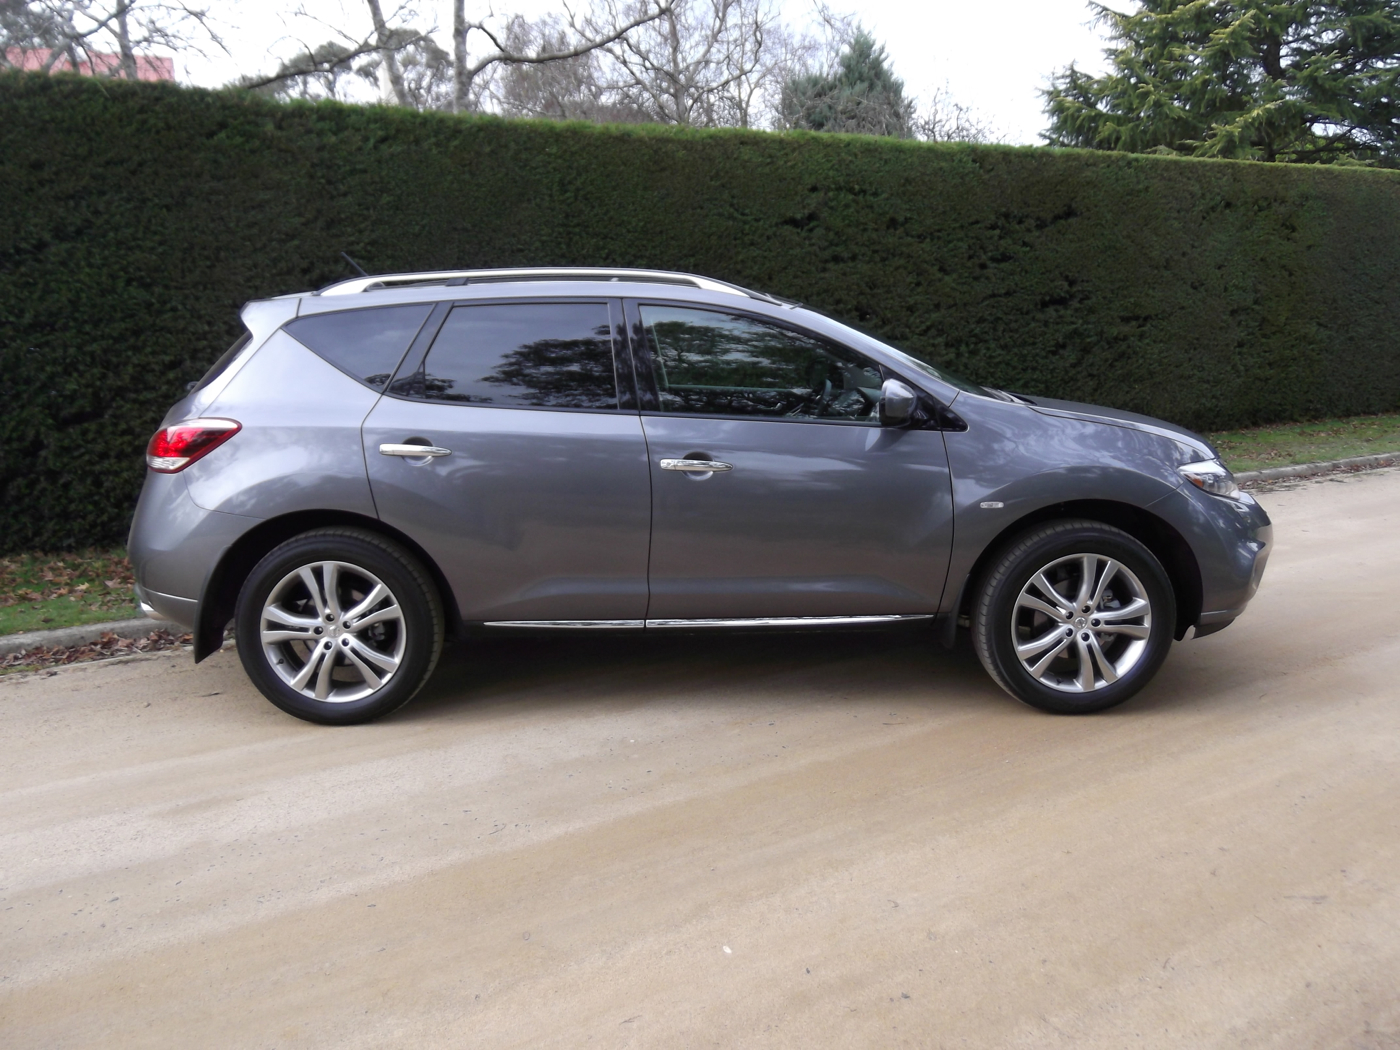 Nissan murano test review #8